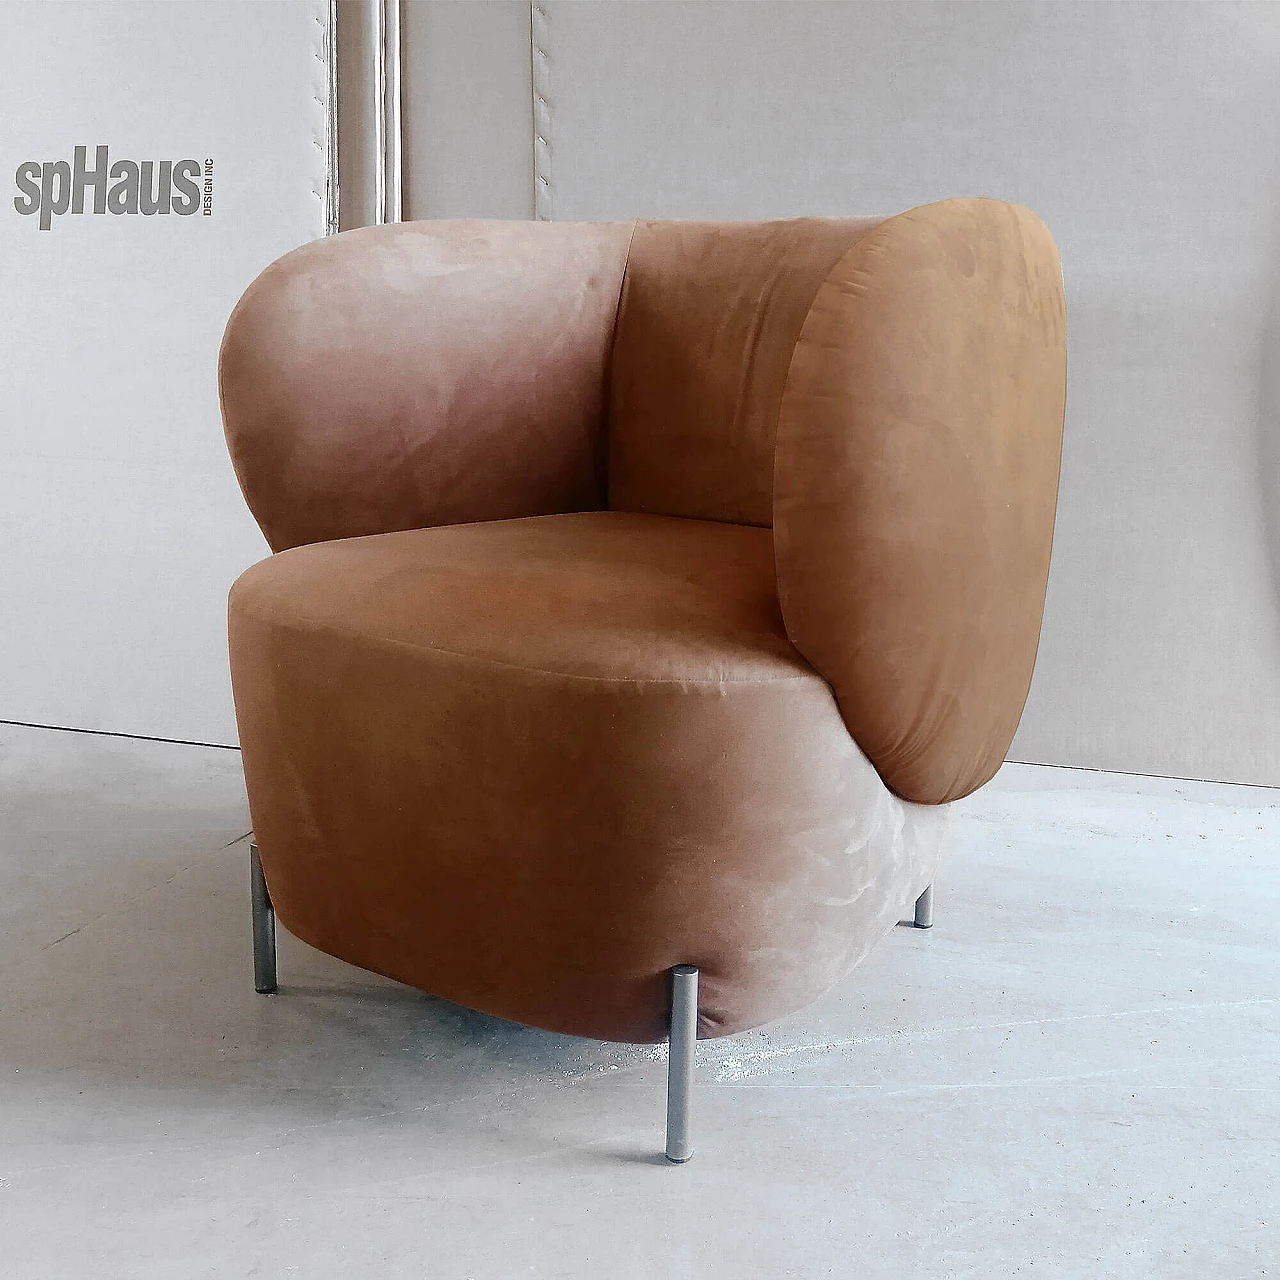 LaBimba suede armchair by Dominika Mala for spHaus, 2021 2